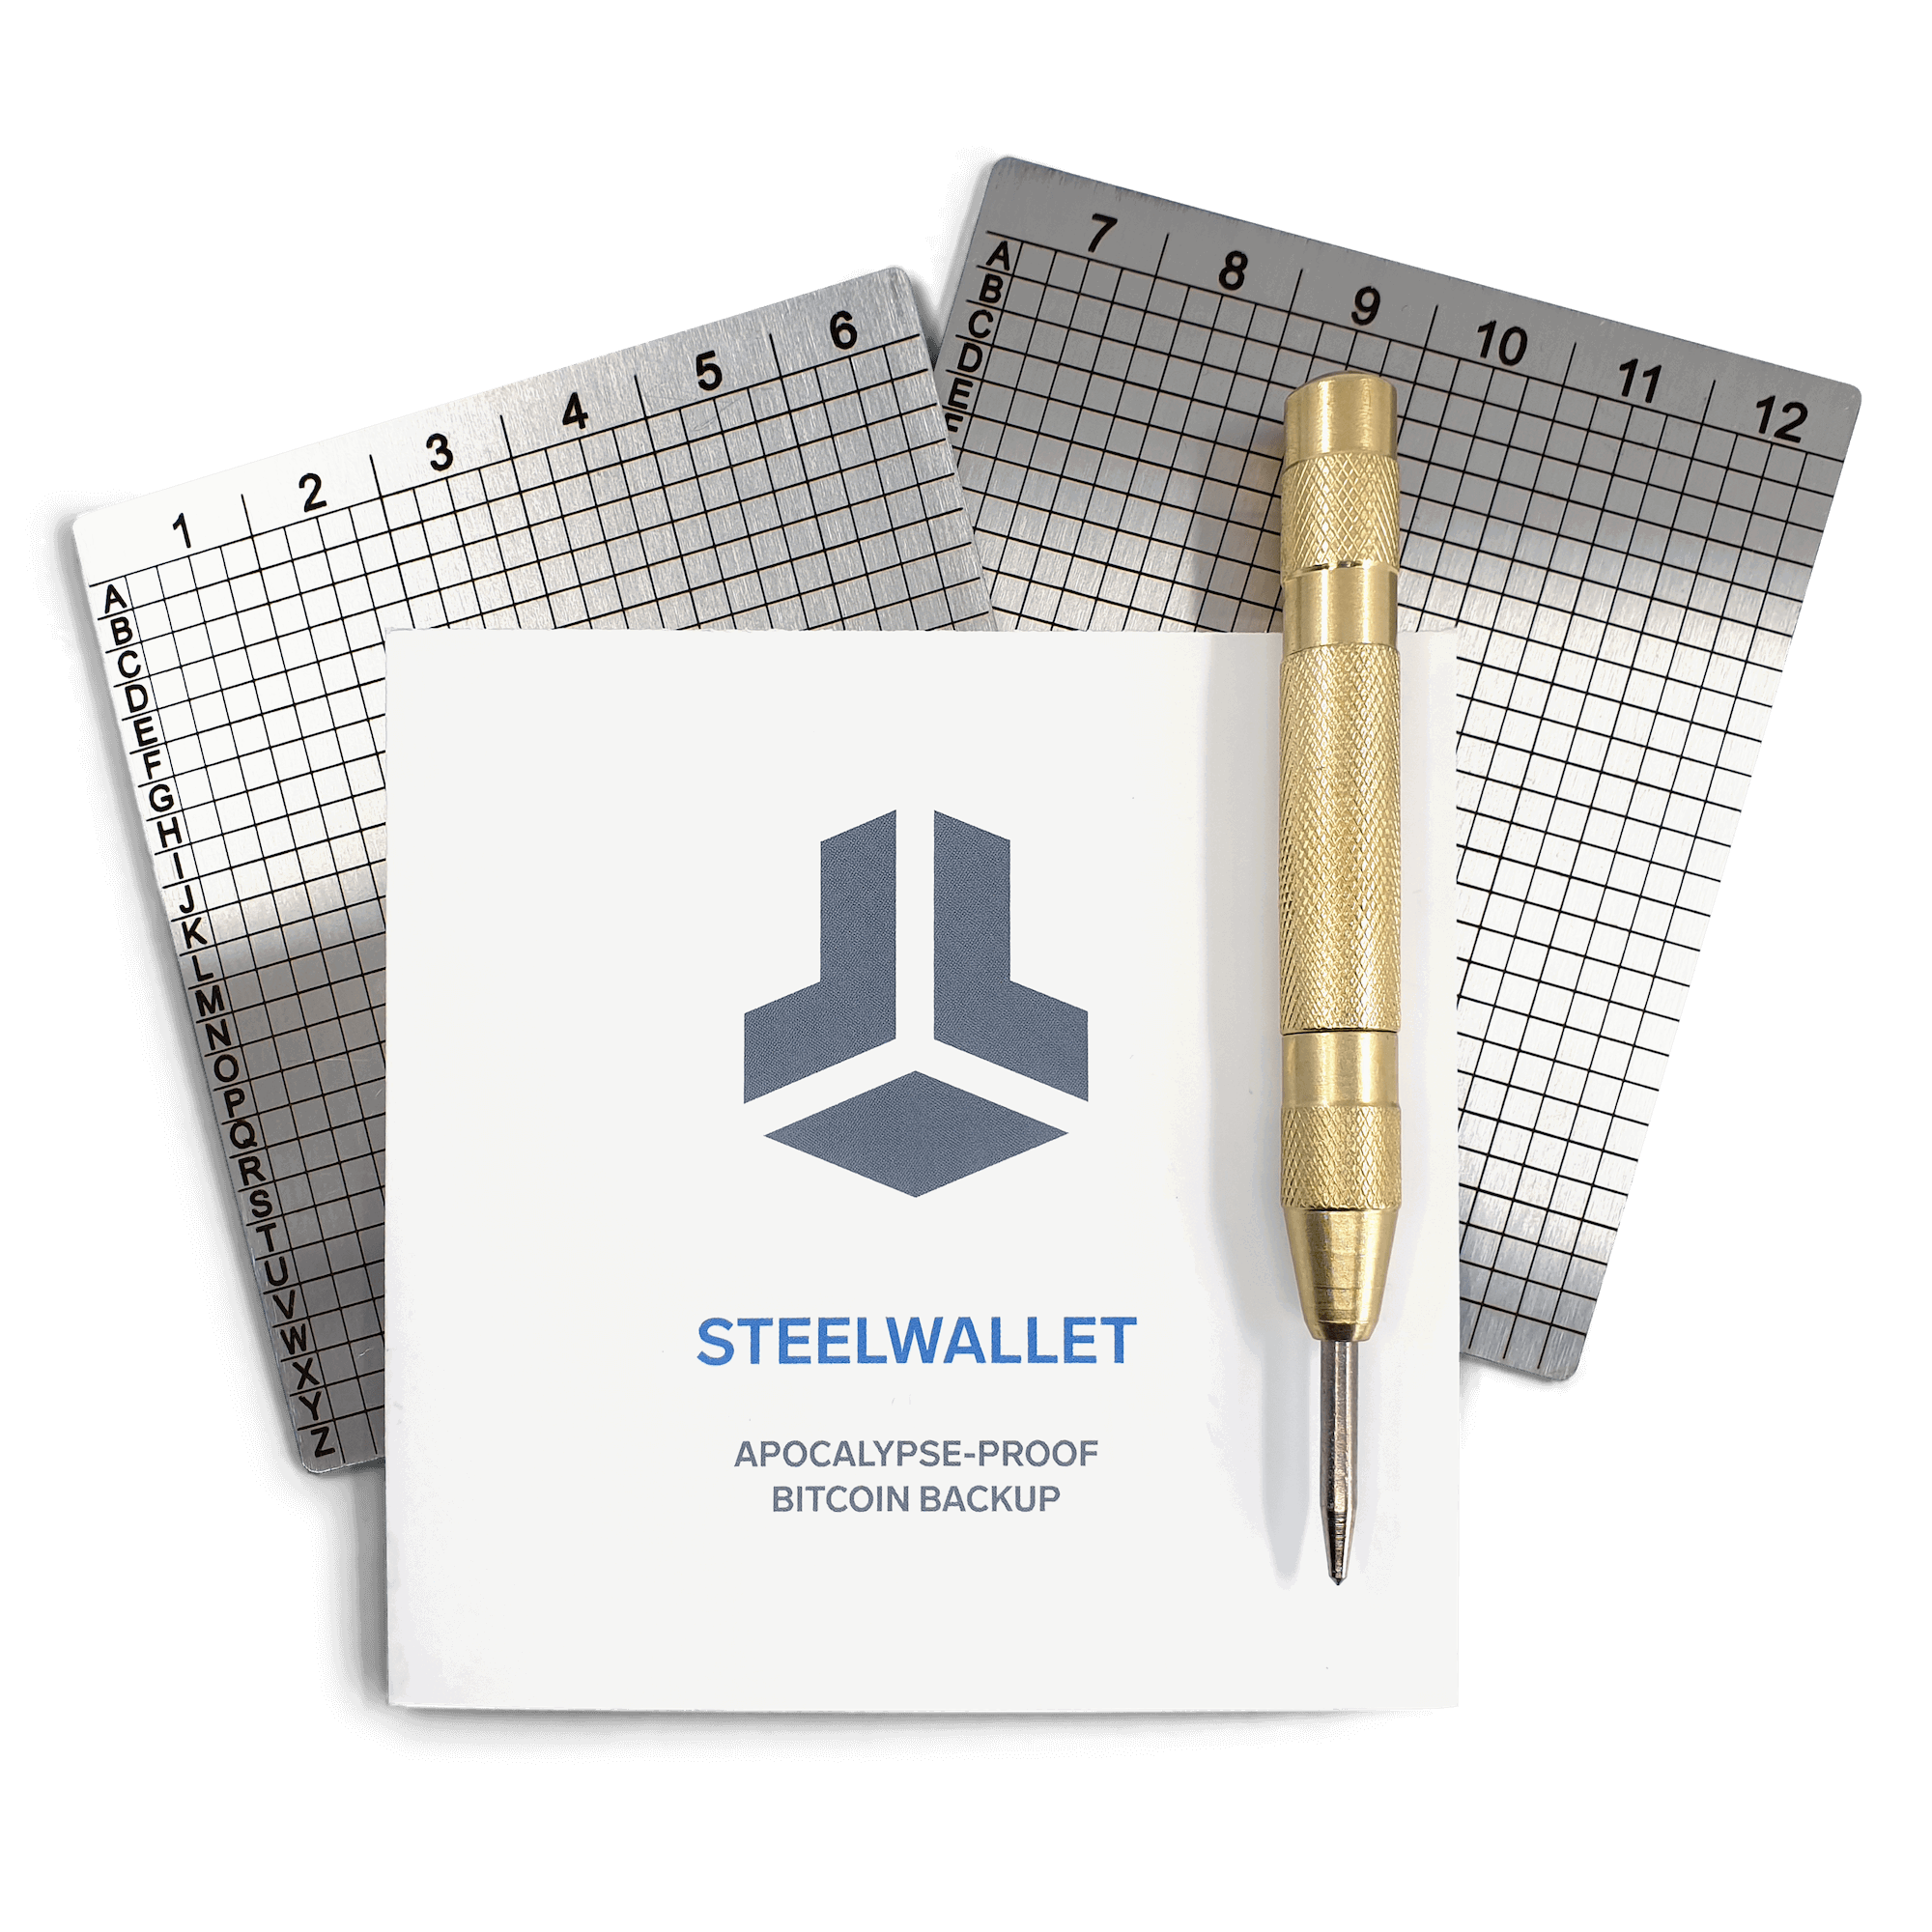 Steelwallet. Protect your wallet backup with a Steelwallet, an easy-to-use, heavy-duty seed backup storage tool.